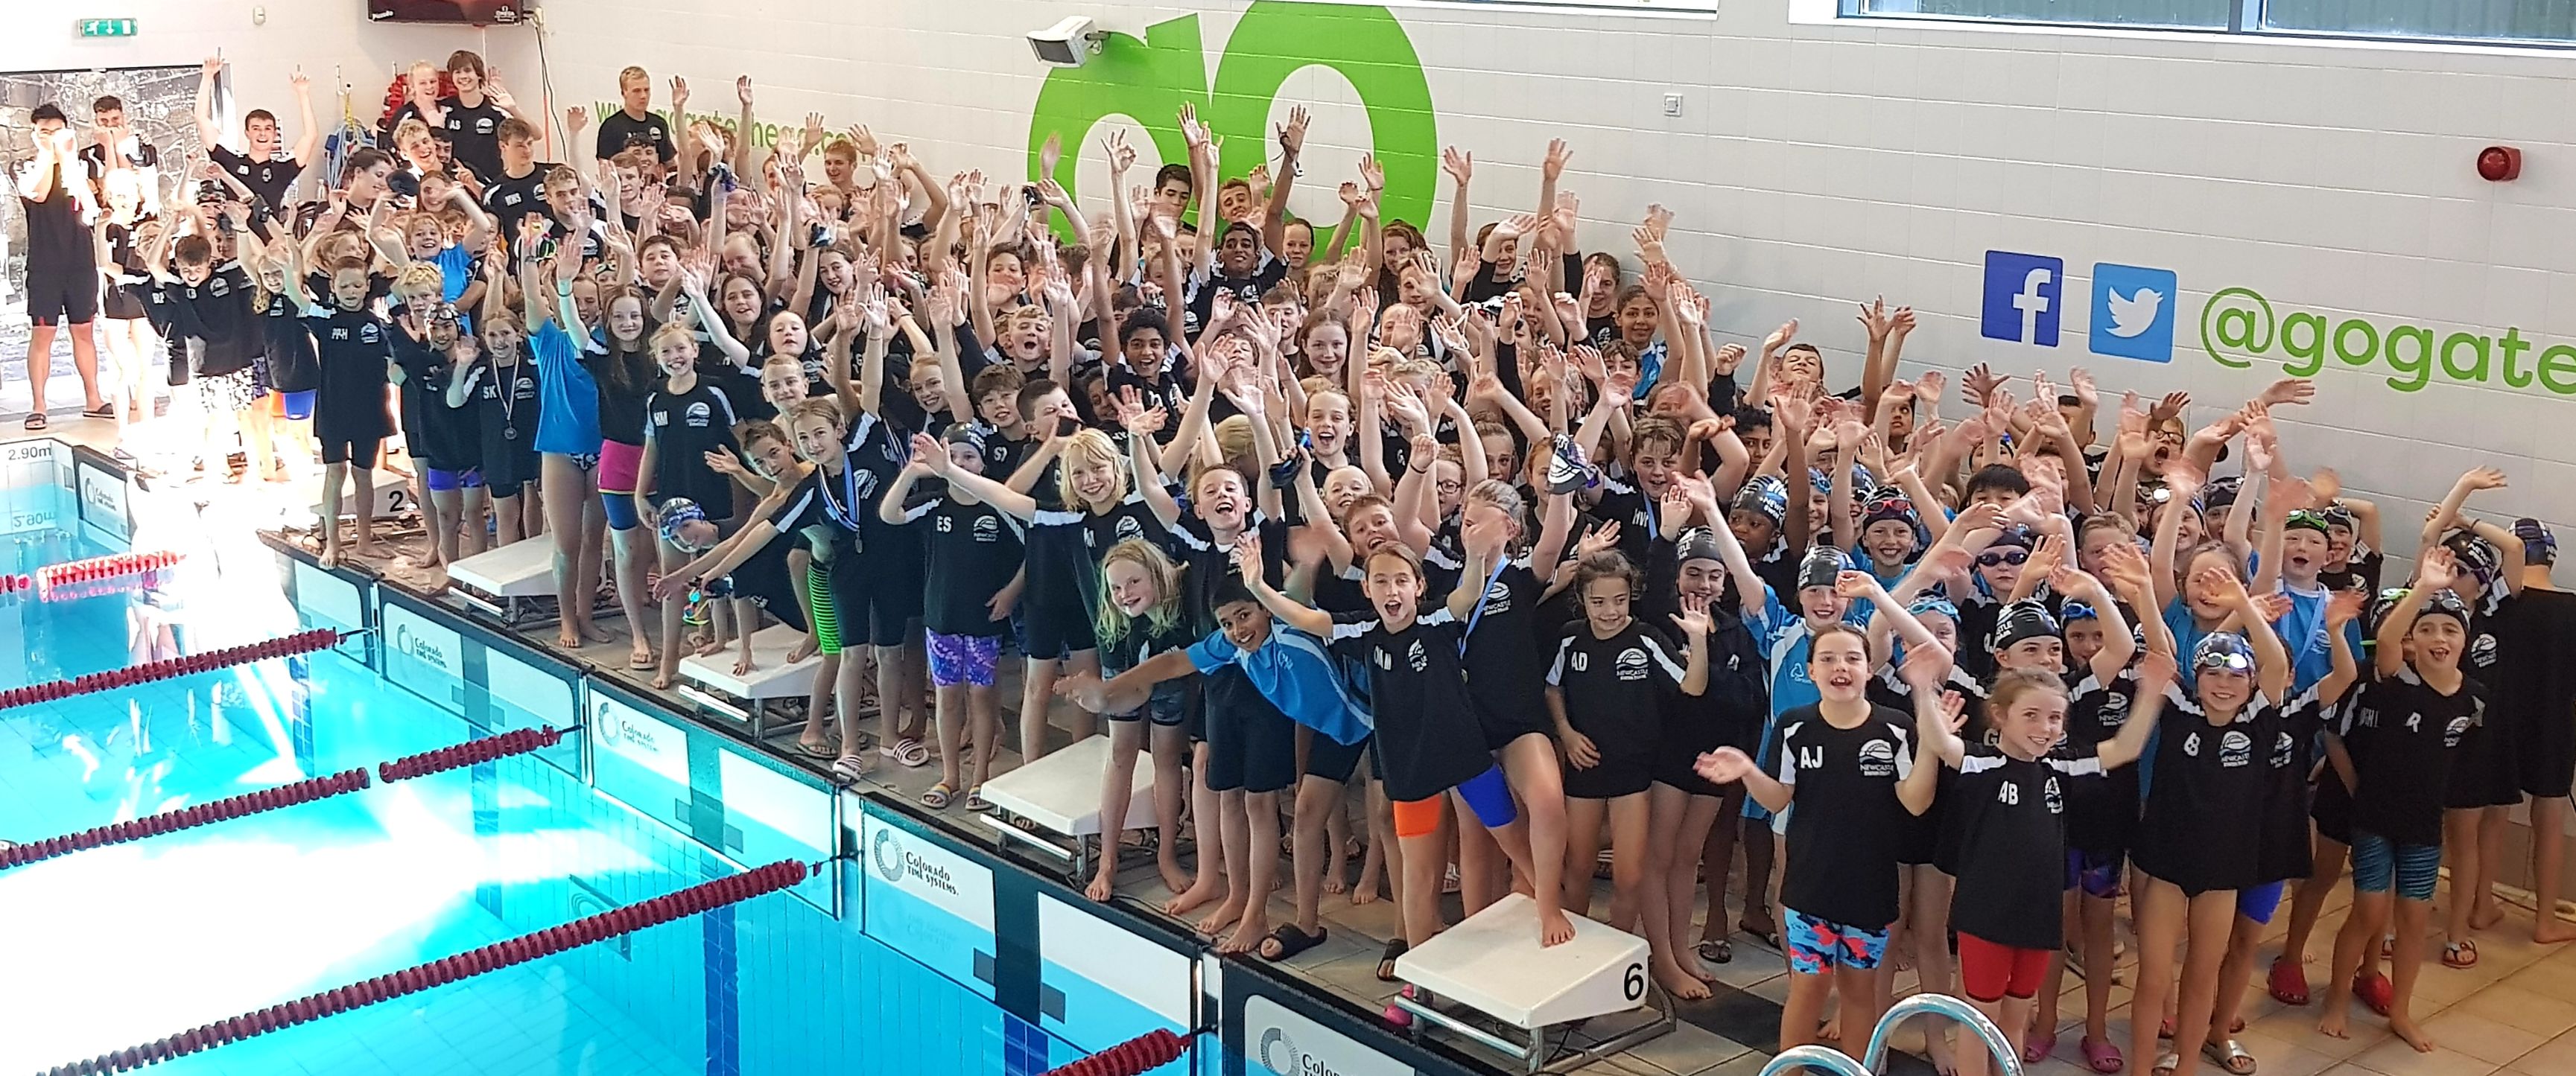 Newcastle Swim Team Covid Recovery Fund - a Sports crowdfunding project ...